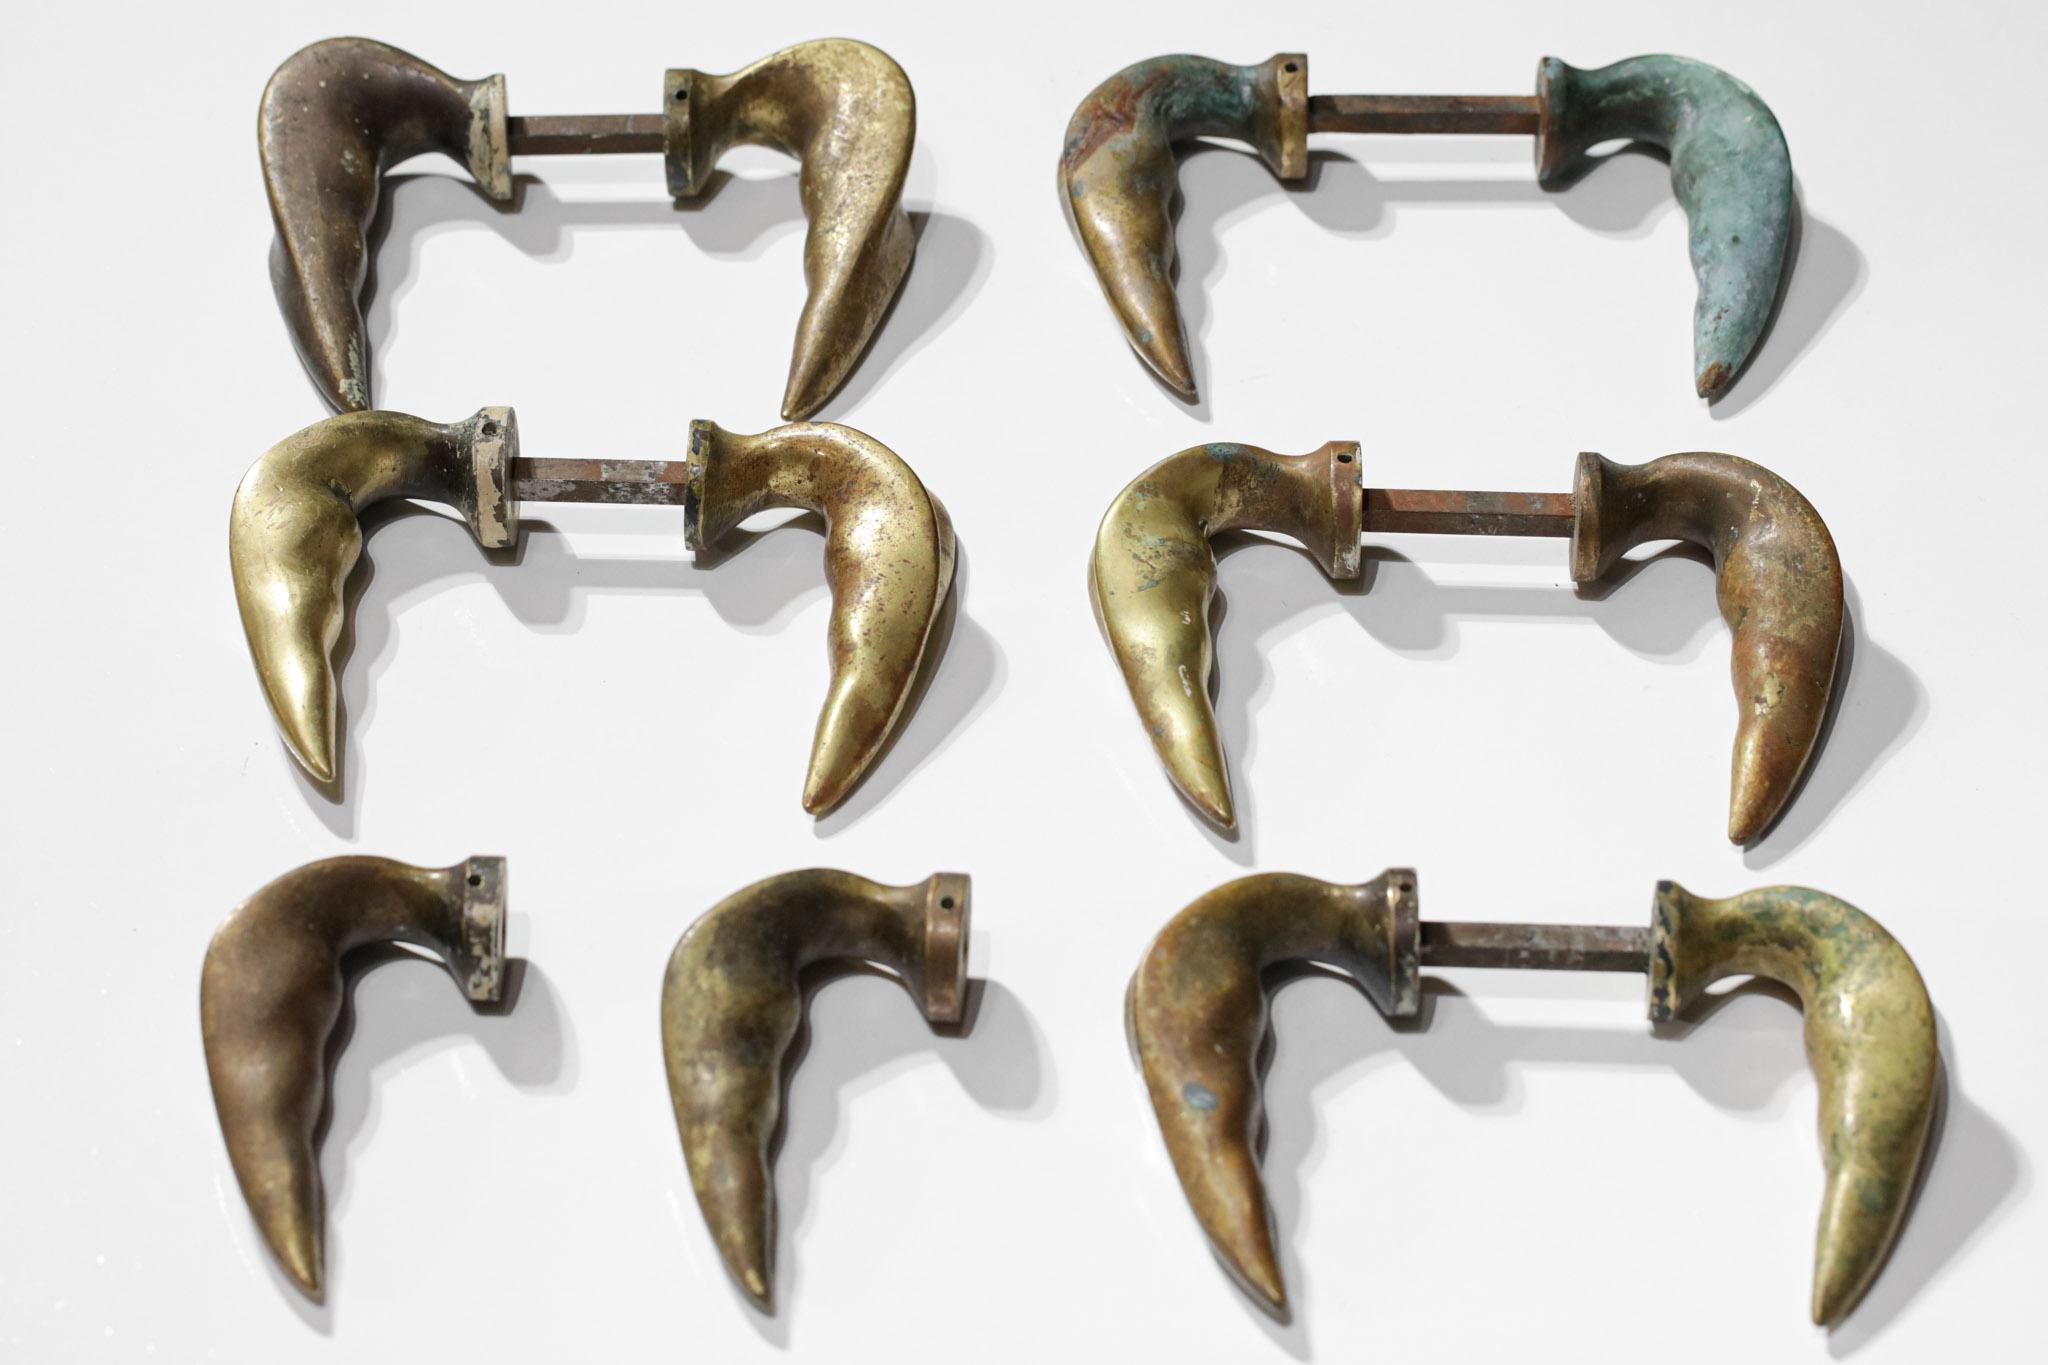 Set of six pairs of Italian bronze door handles from the 1950s. Very nice leaf-shaped handles, nice patina of time on the bronze giving it different shades (see pictures).  Note that one of the pair is missing a pin, and various traces of use on the